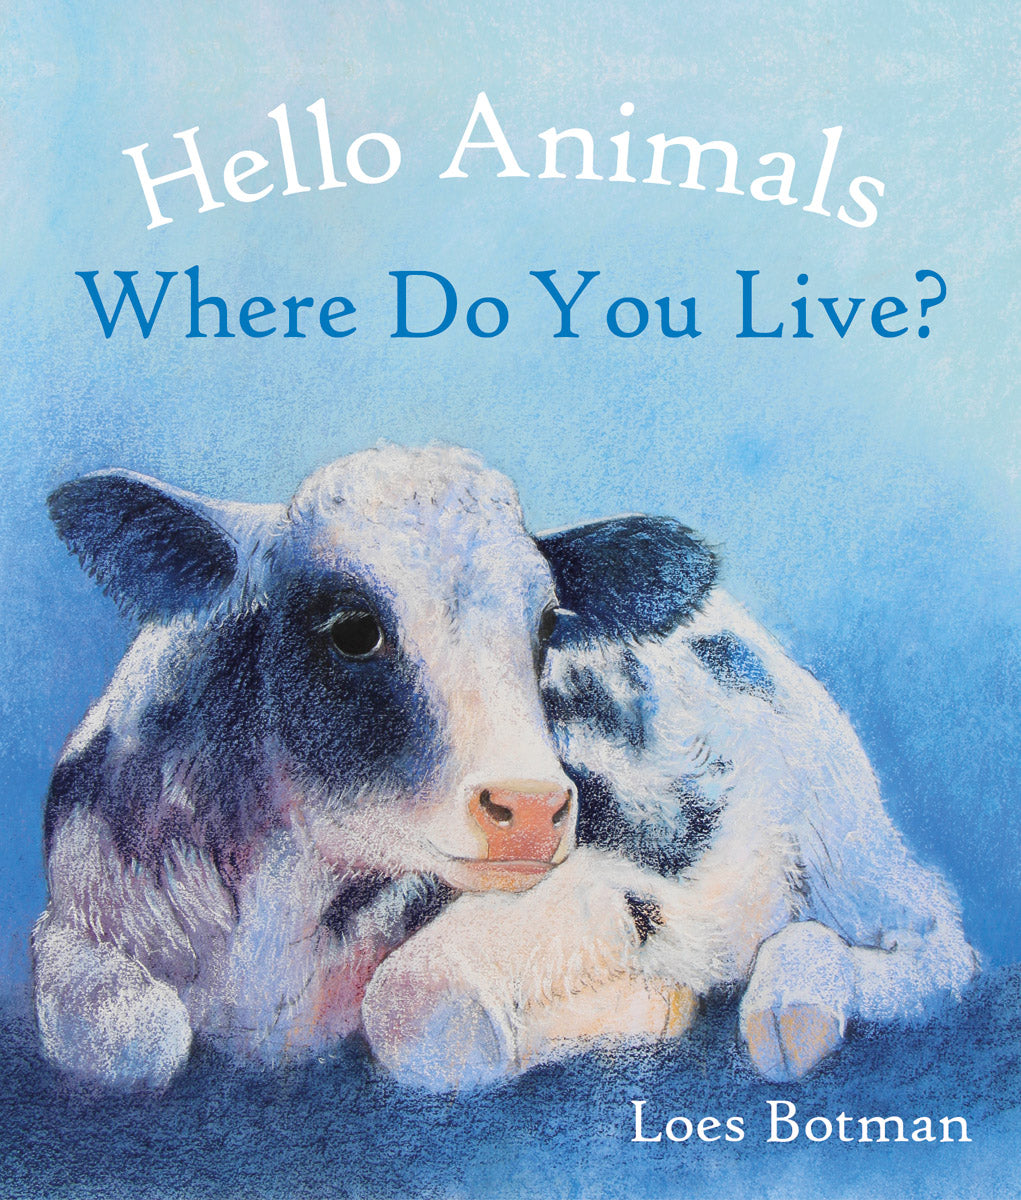 Hello Animals, Where Do You Live? by Loes Botman